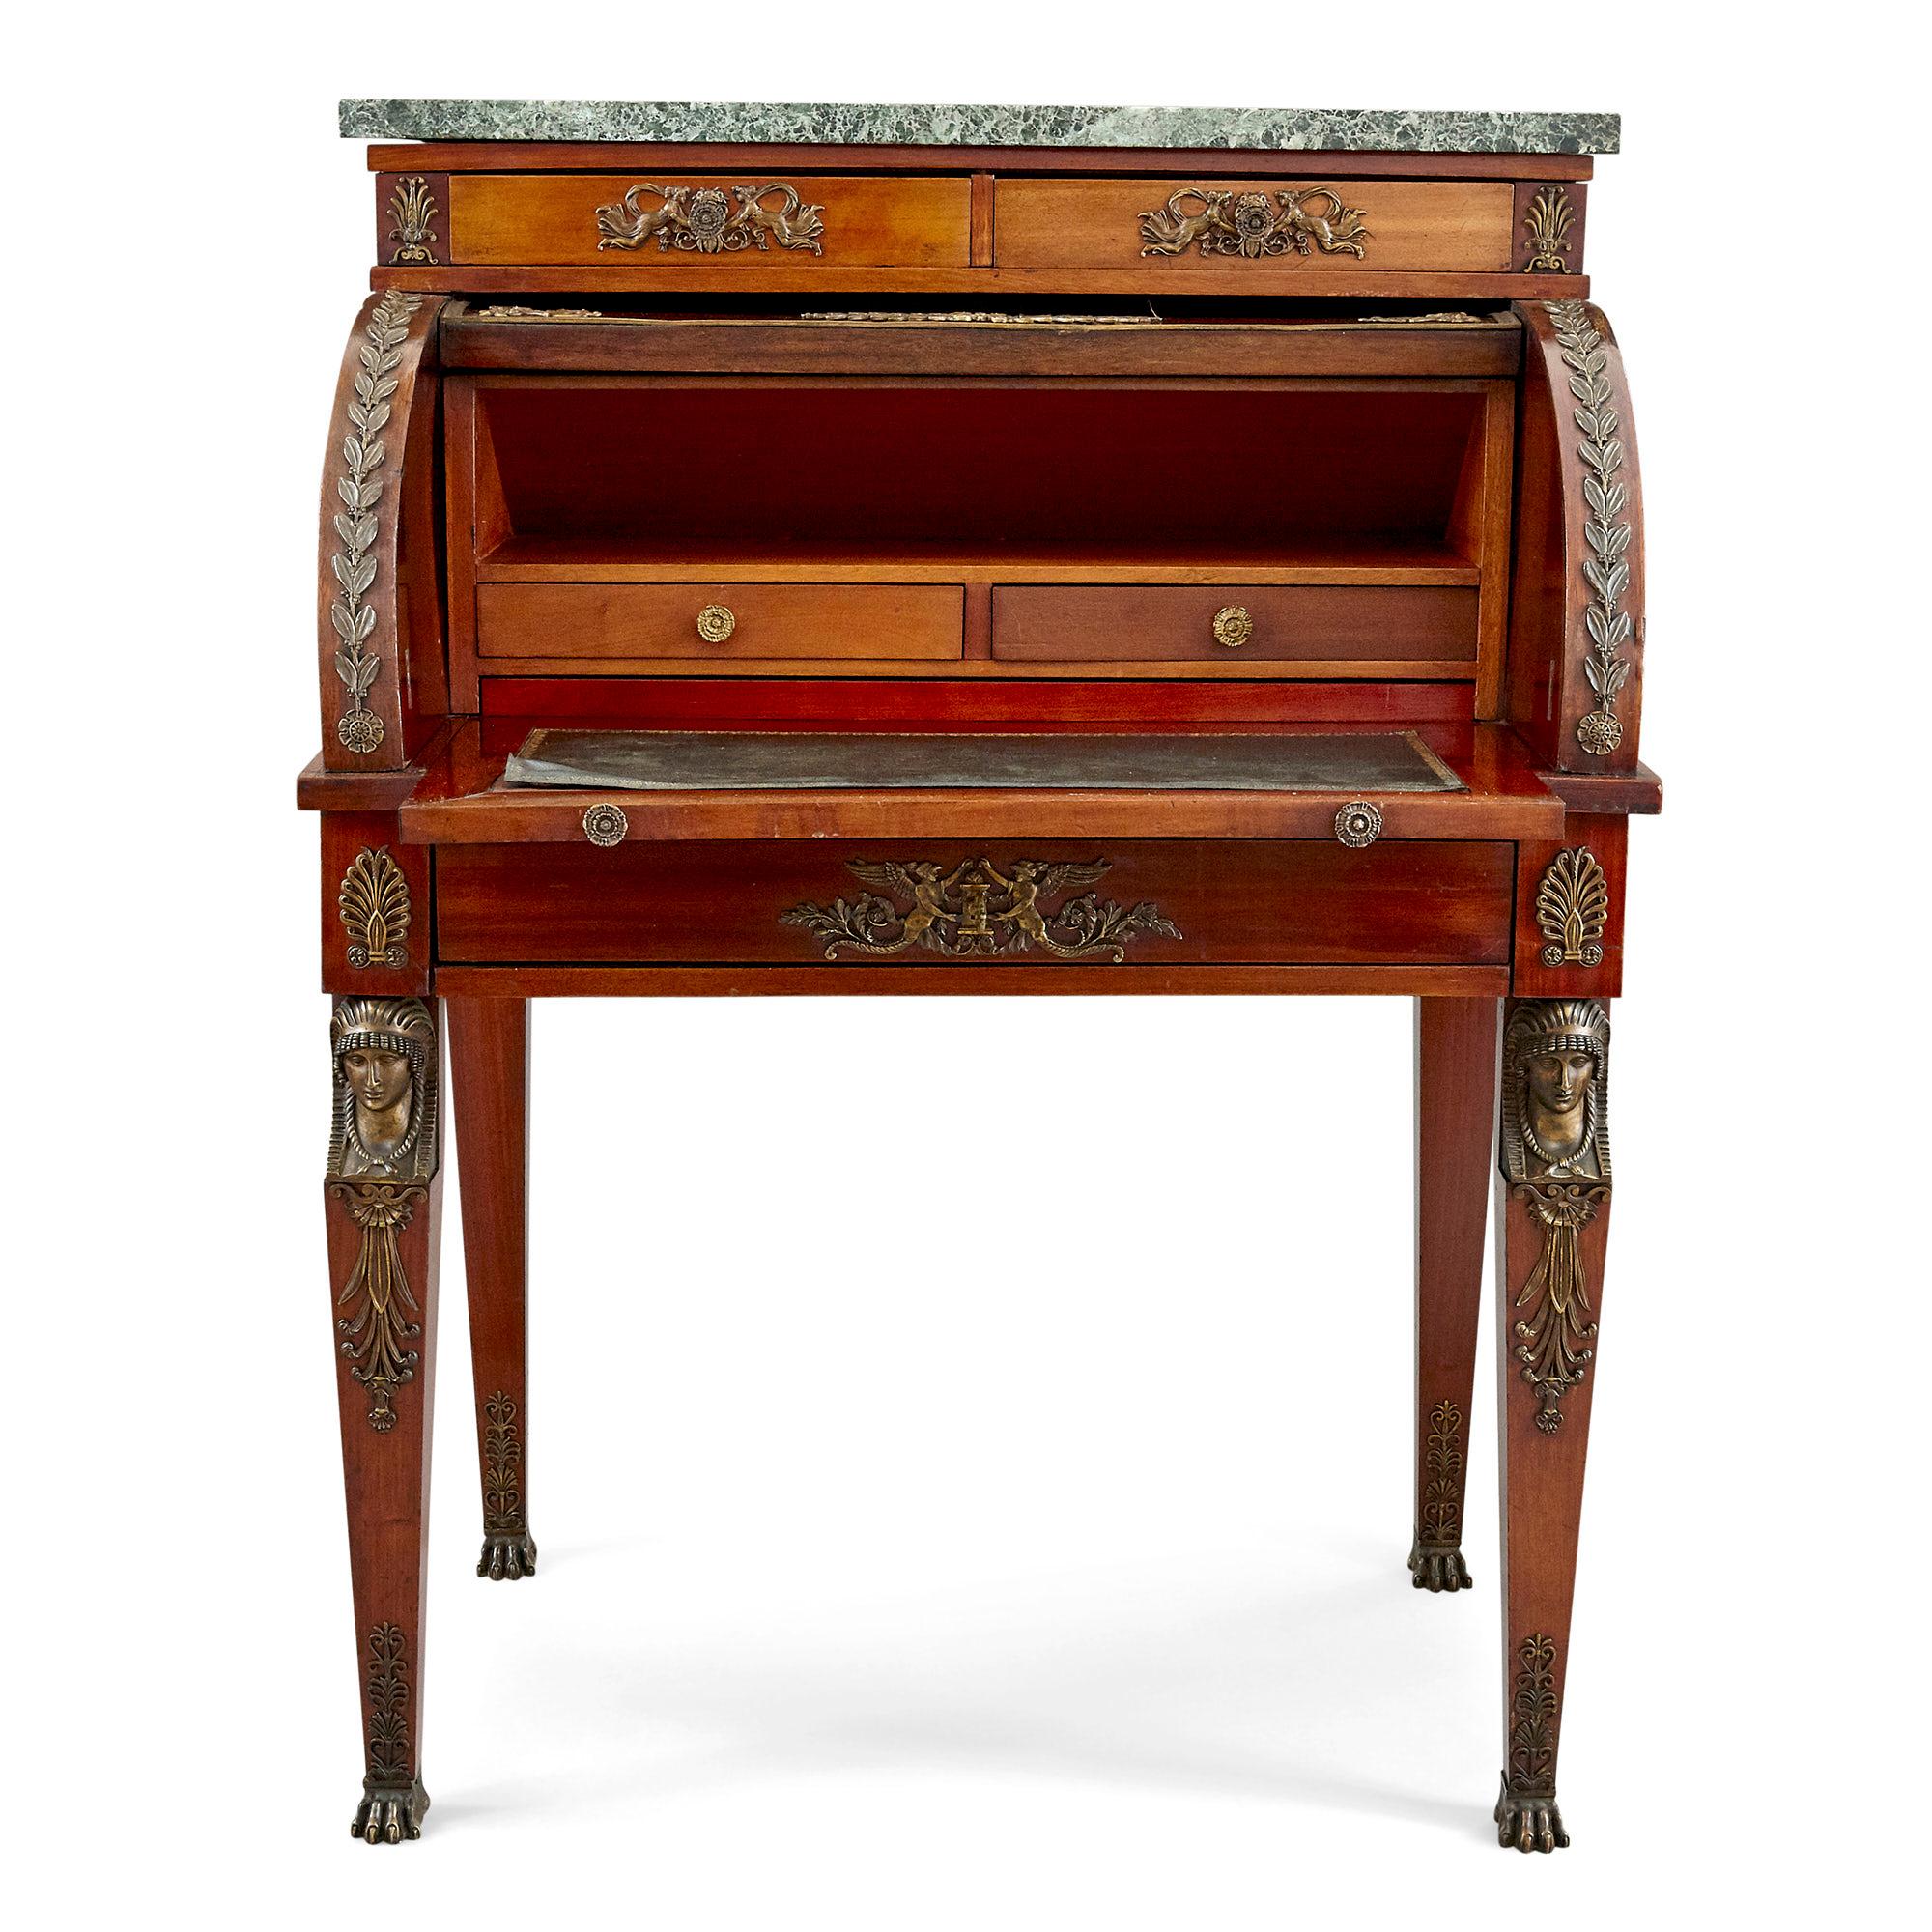 Early 20th century French Empire style roll-top desk
French, early 20th century
Dimensions: Height 113cm, width 84cm, depth 62cm

This charming roll-top desk is crafted from ormolu mounted hardwood, with a grey-green marble top and leather